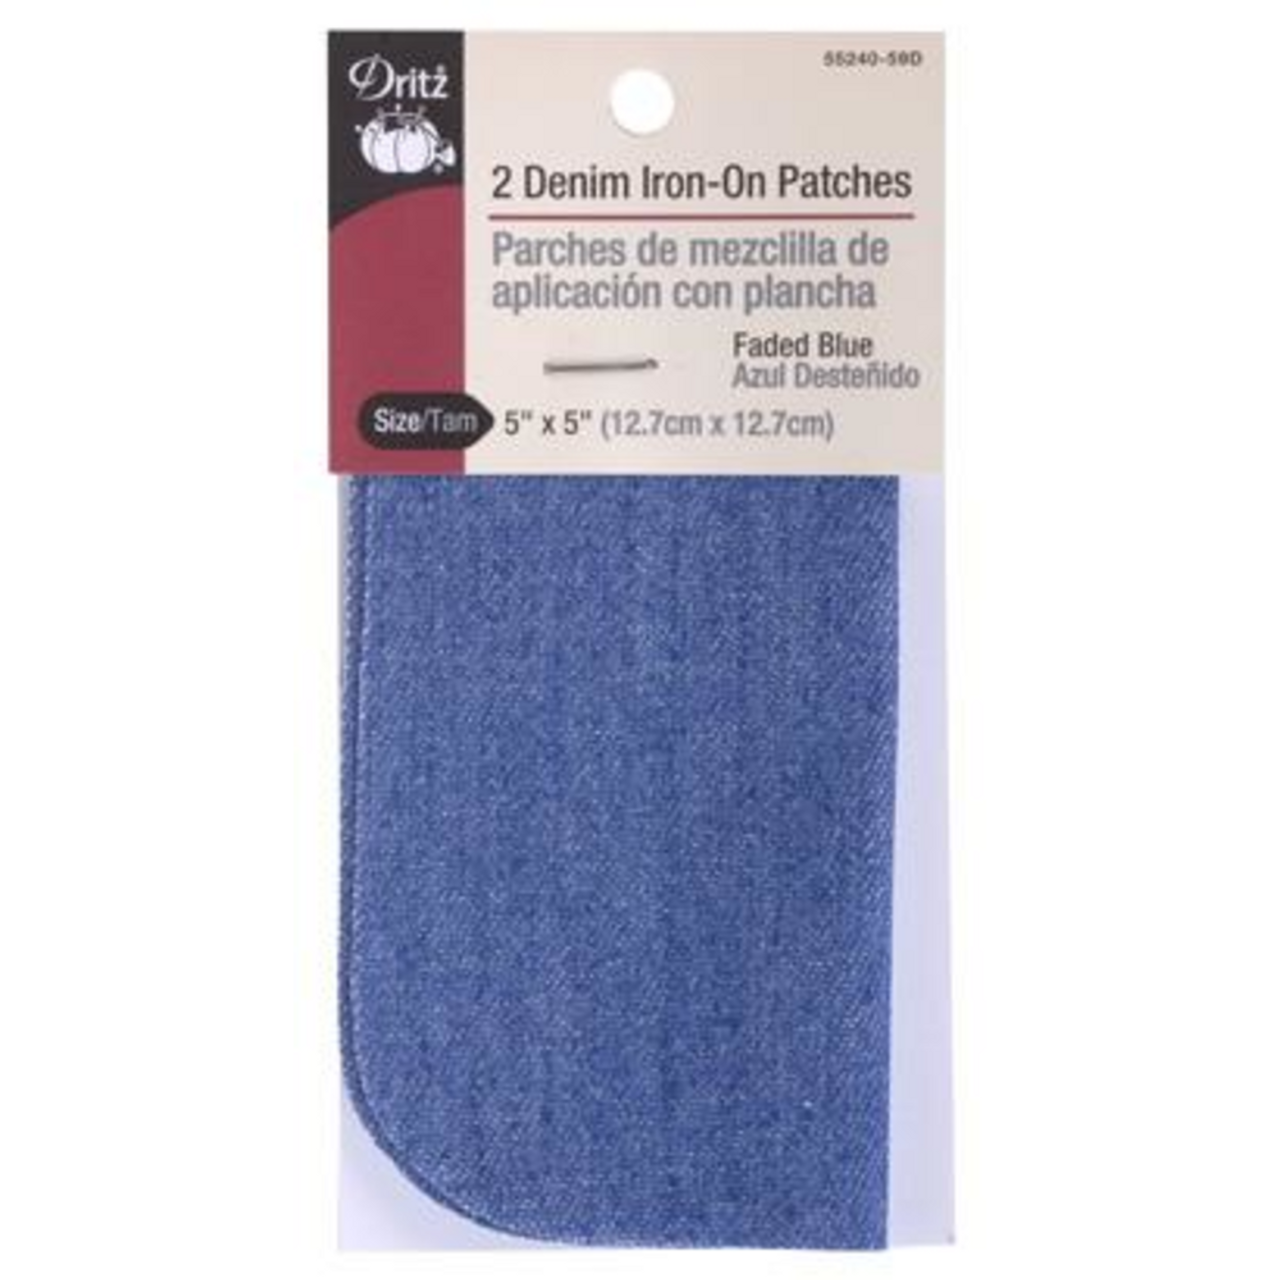  Extra Large Patches for Jeans, Extra Large Iron on Patches for  Jeans, Denim Patch for Denim Inside and Outside, for Jeans Clothing Hole  Repairing and Decoration（Blue）